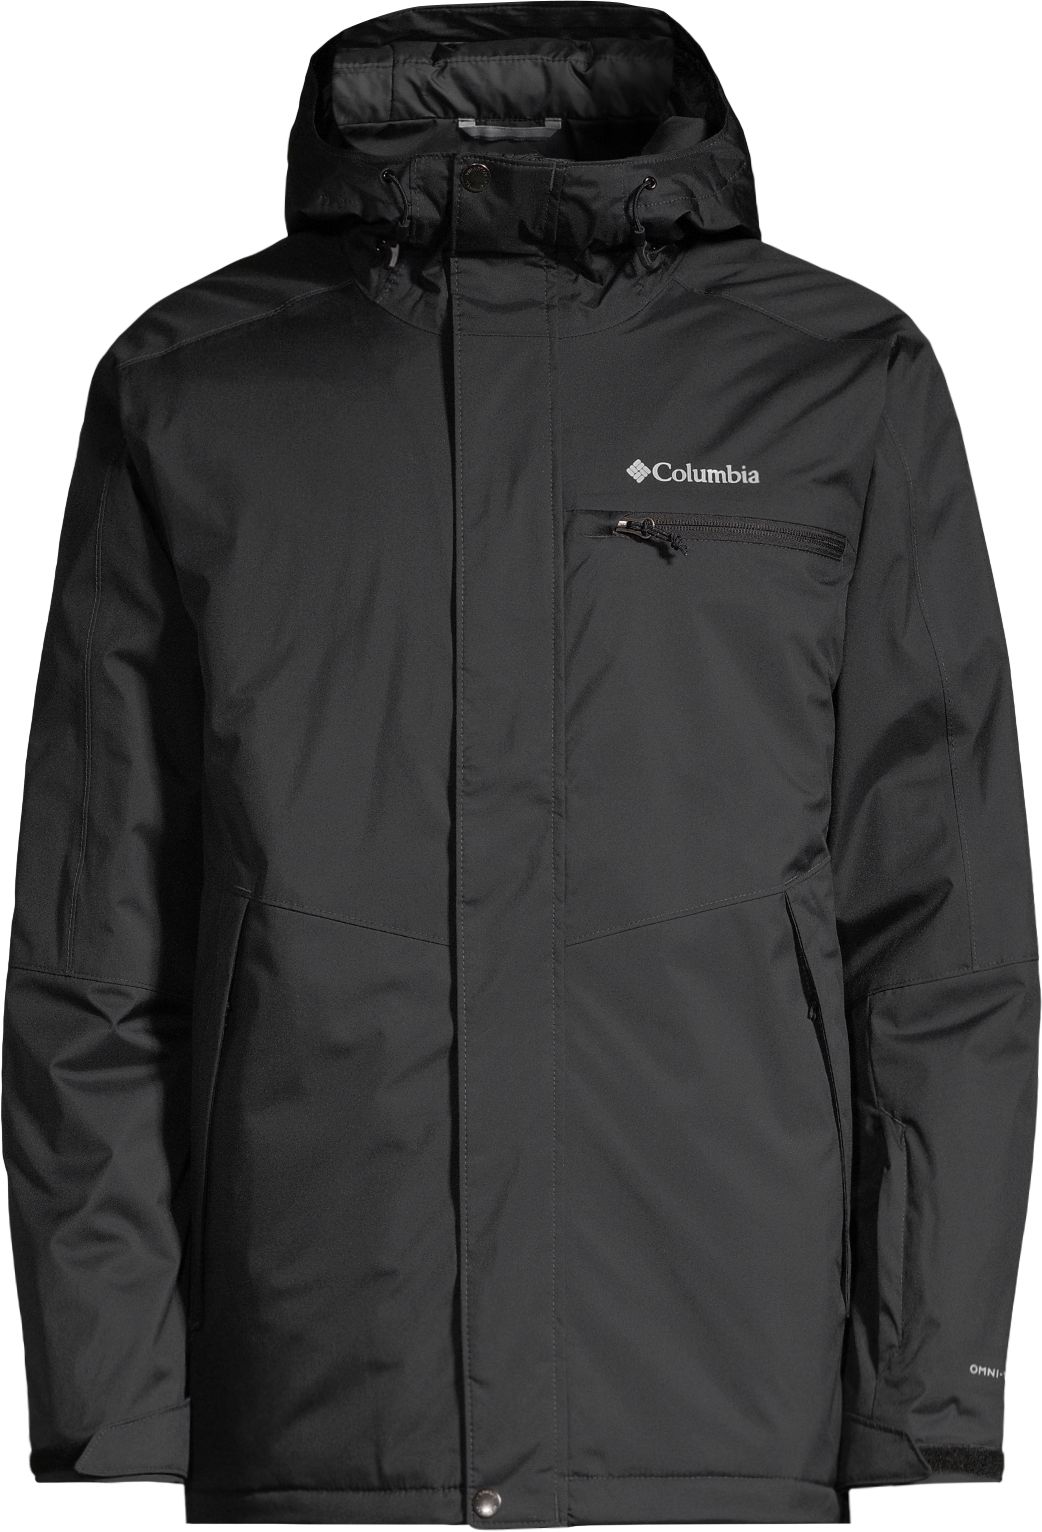 Columbia Men's Valley Point Winter Ski Jacket, Insulated, Hooded,  Waterproof